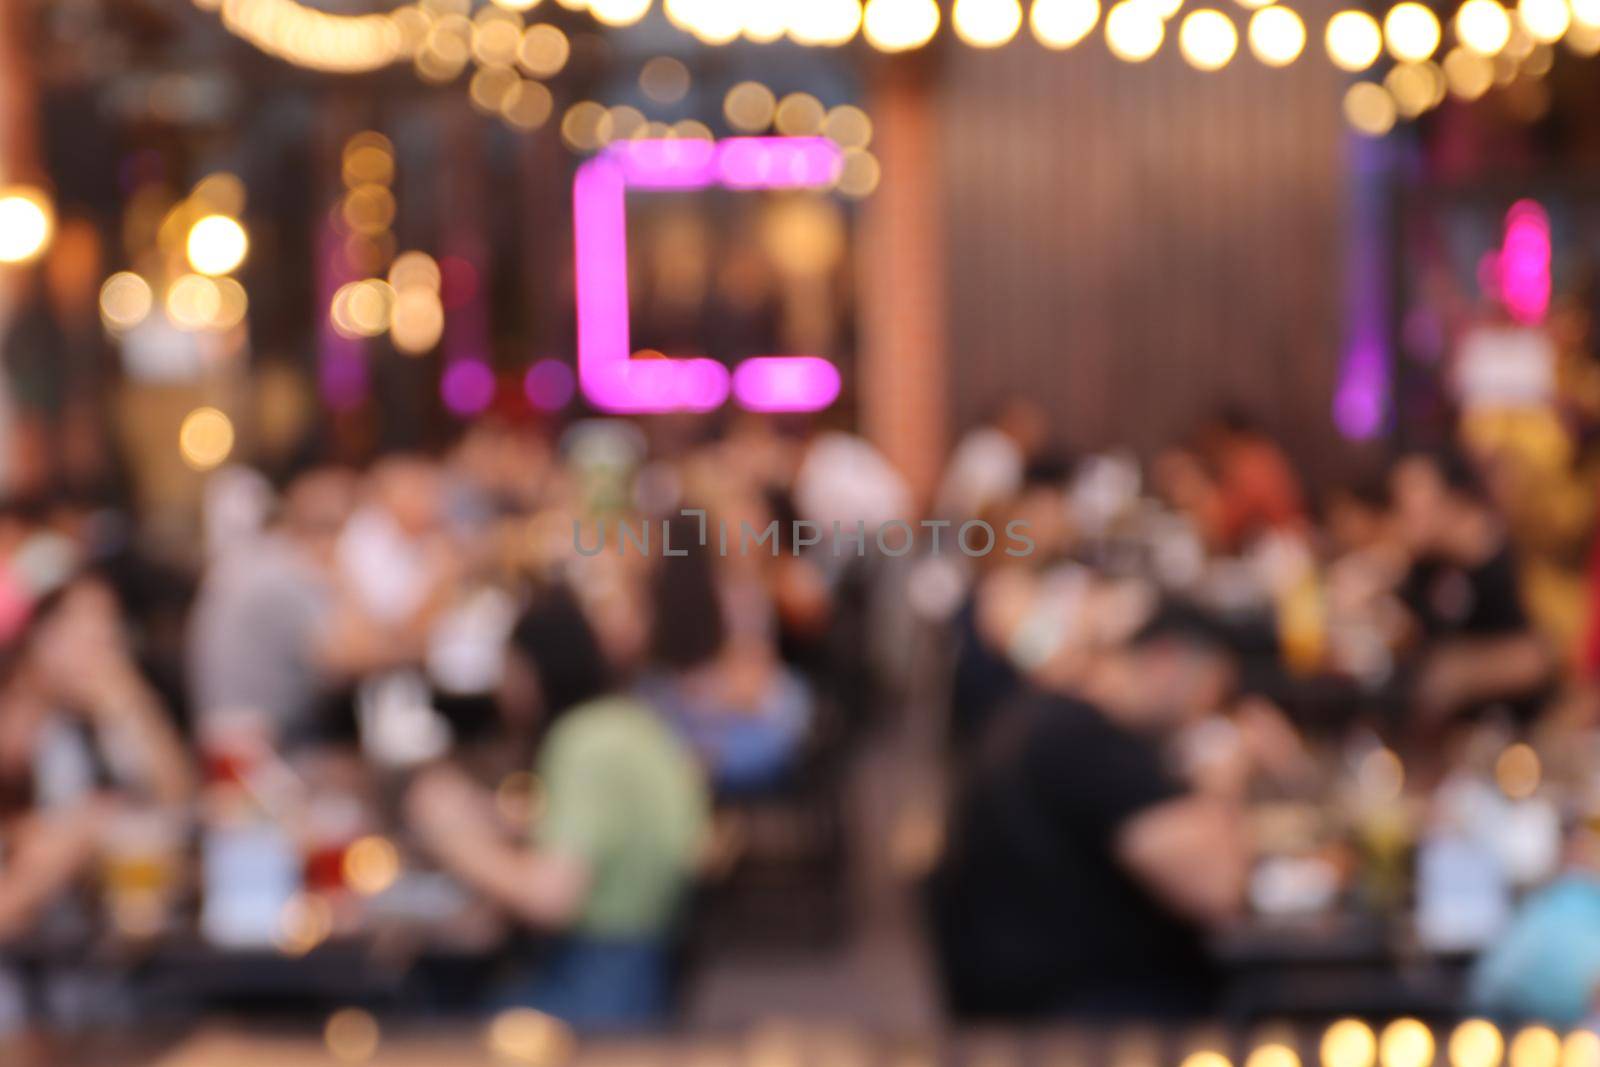 blurred image at the restaurant night time, many people in the restaurant eat and party happy relaxing  by piyaphun